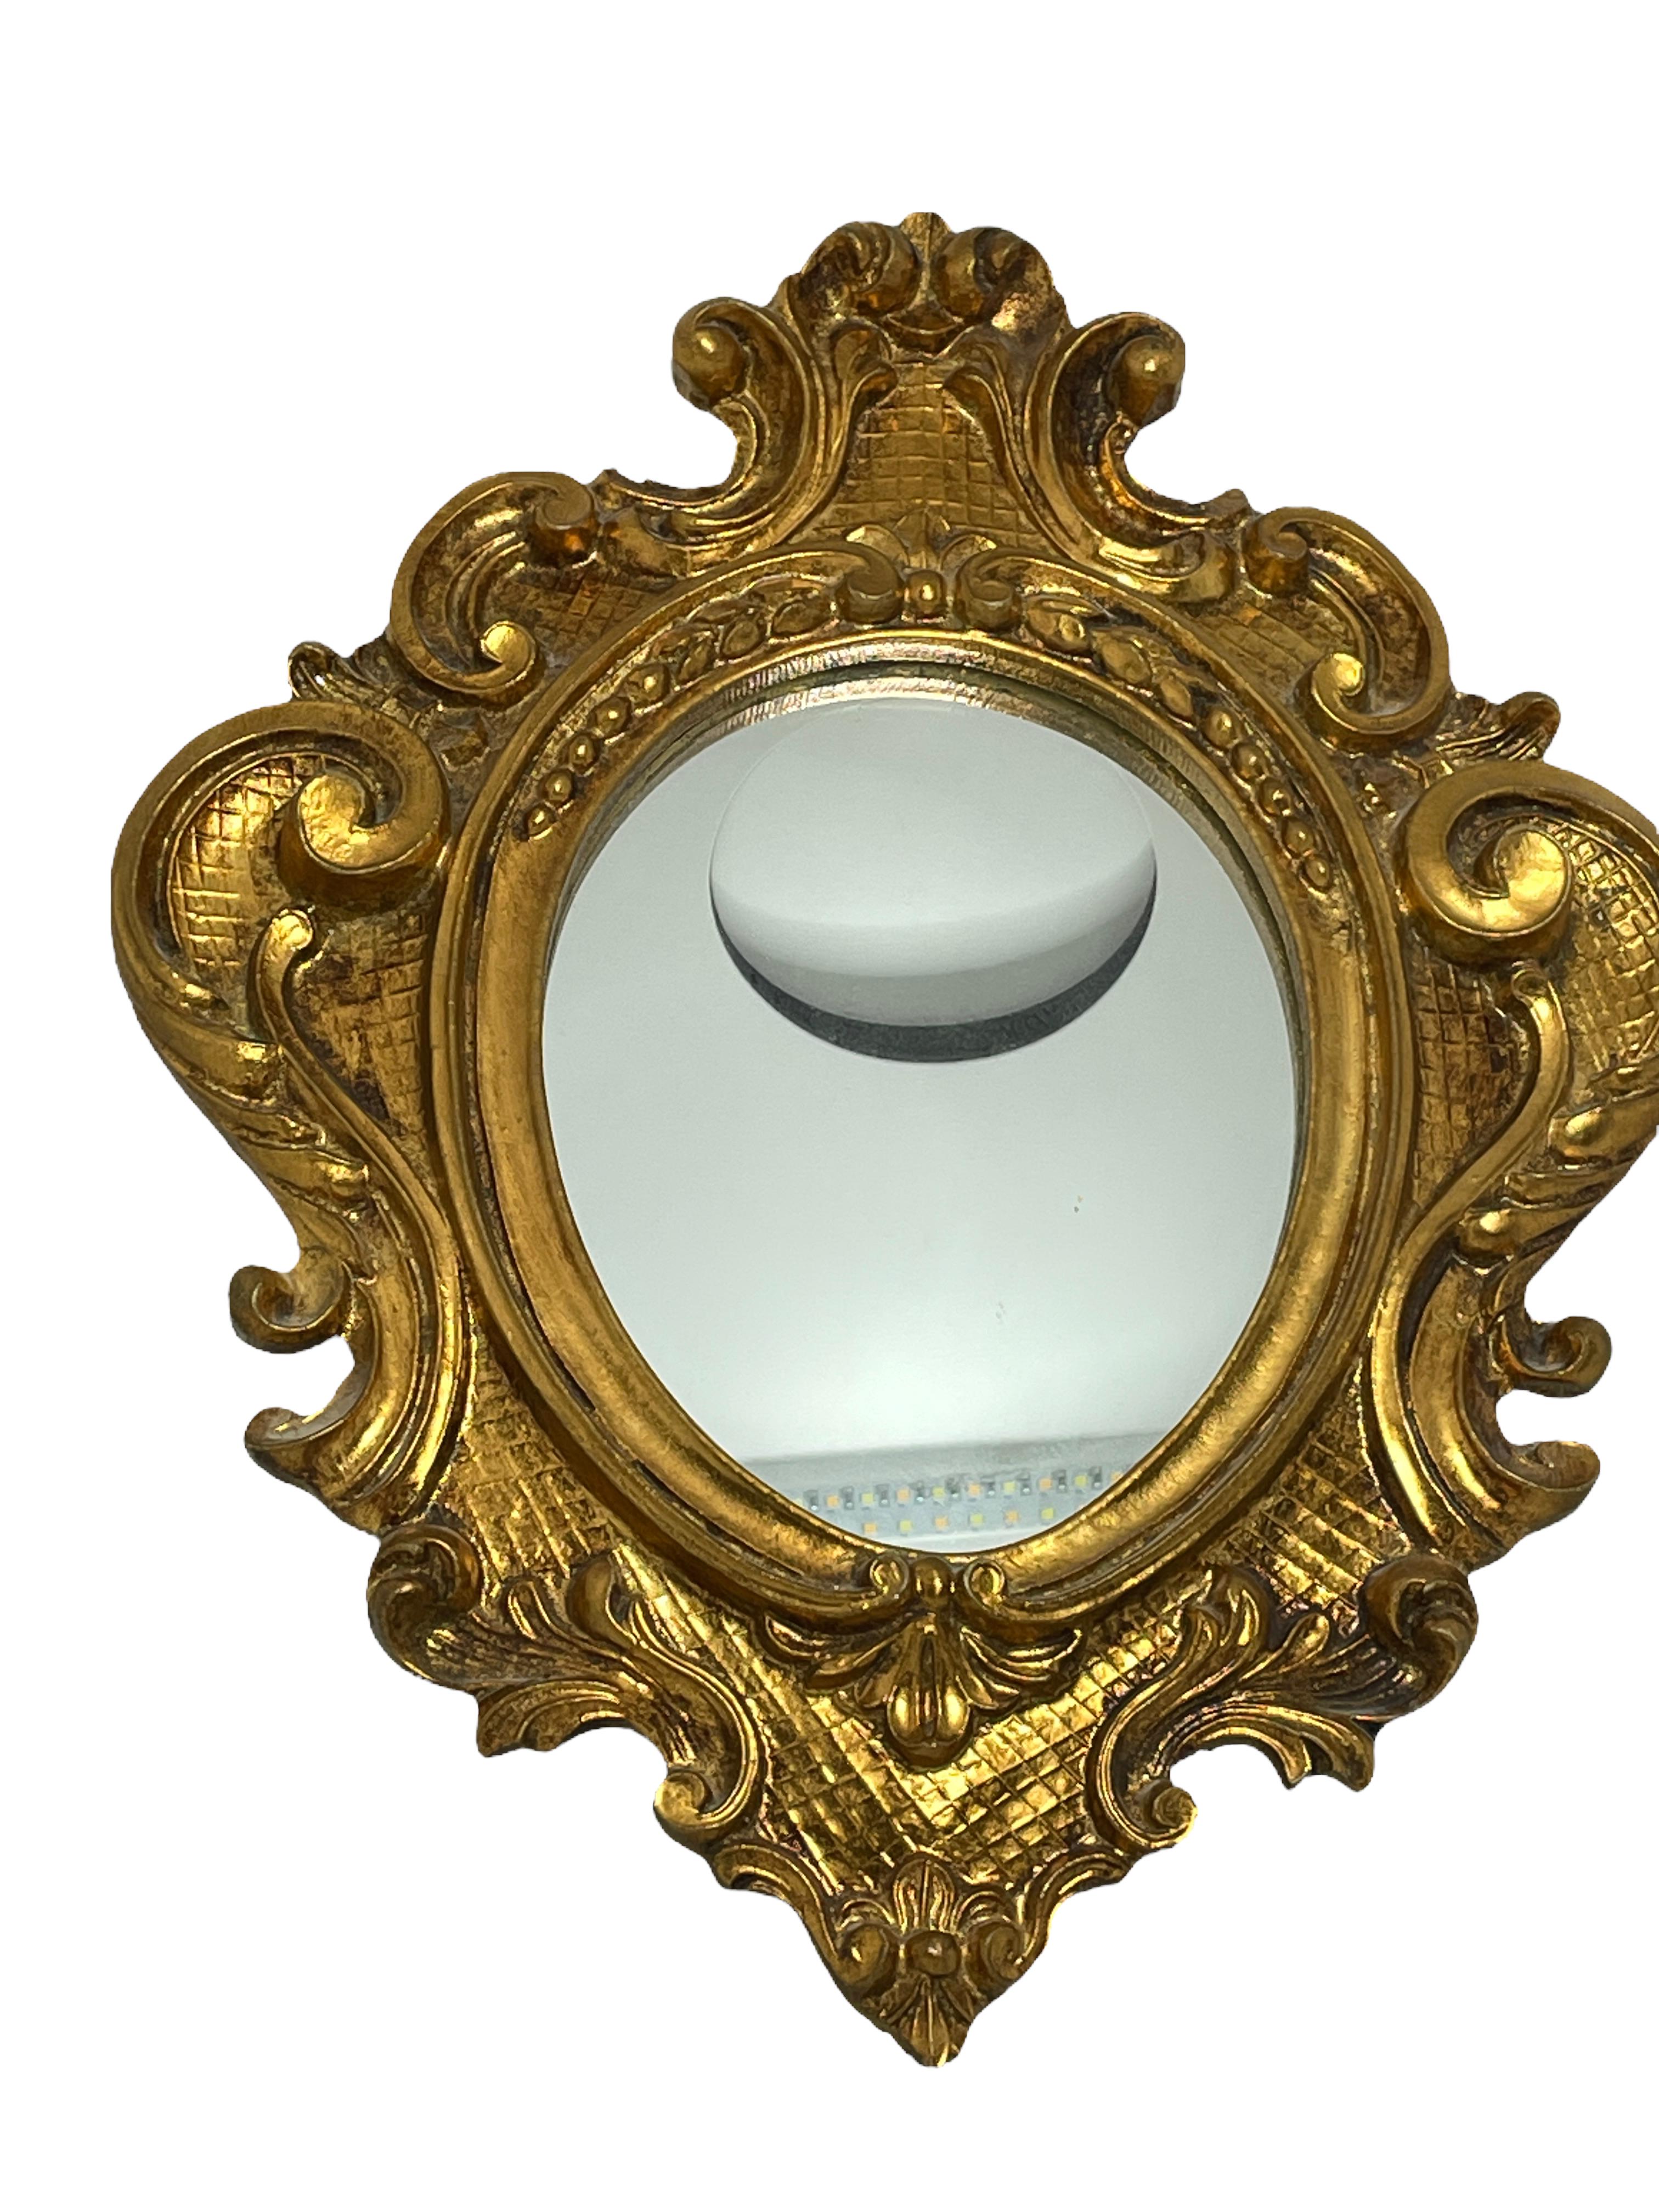 A gorgeous toleware mirror. Made of gilt wood and composition. A nice addition to any room. Mirror itself is approx. 7.5